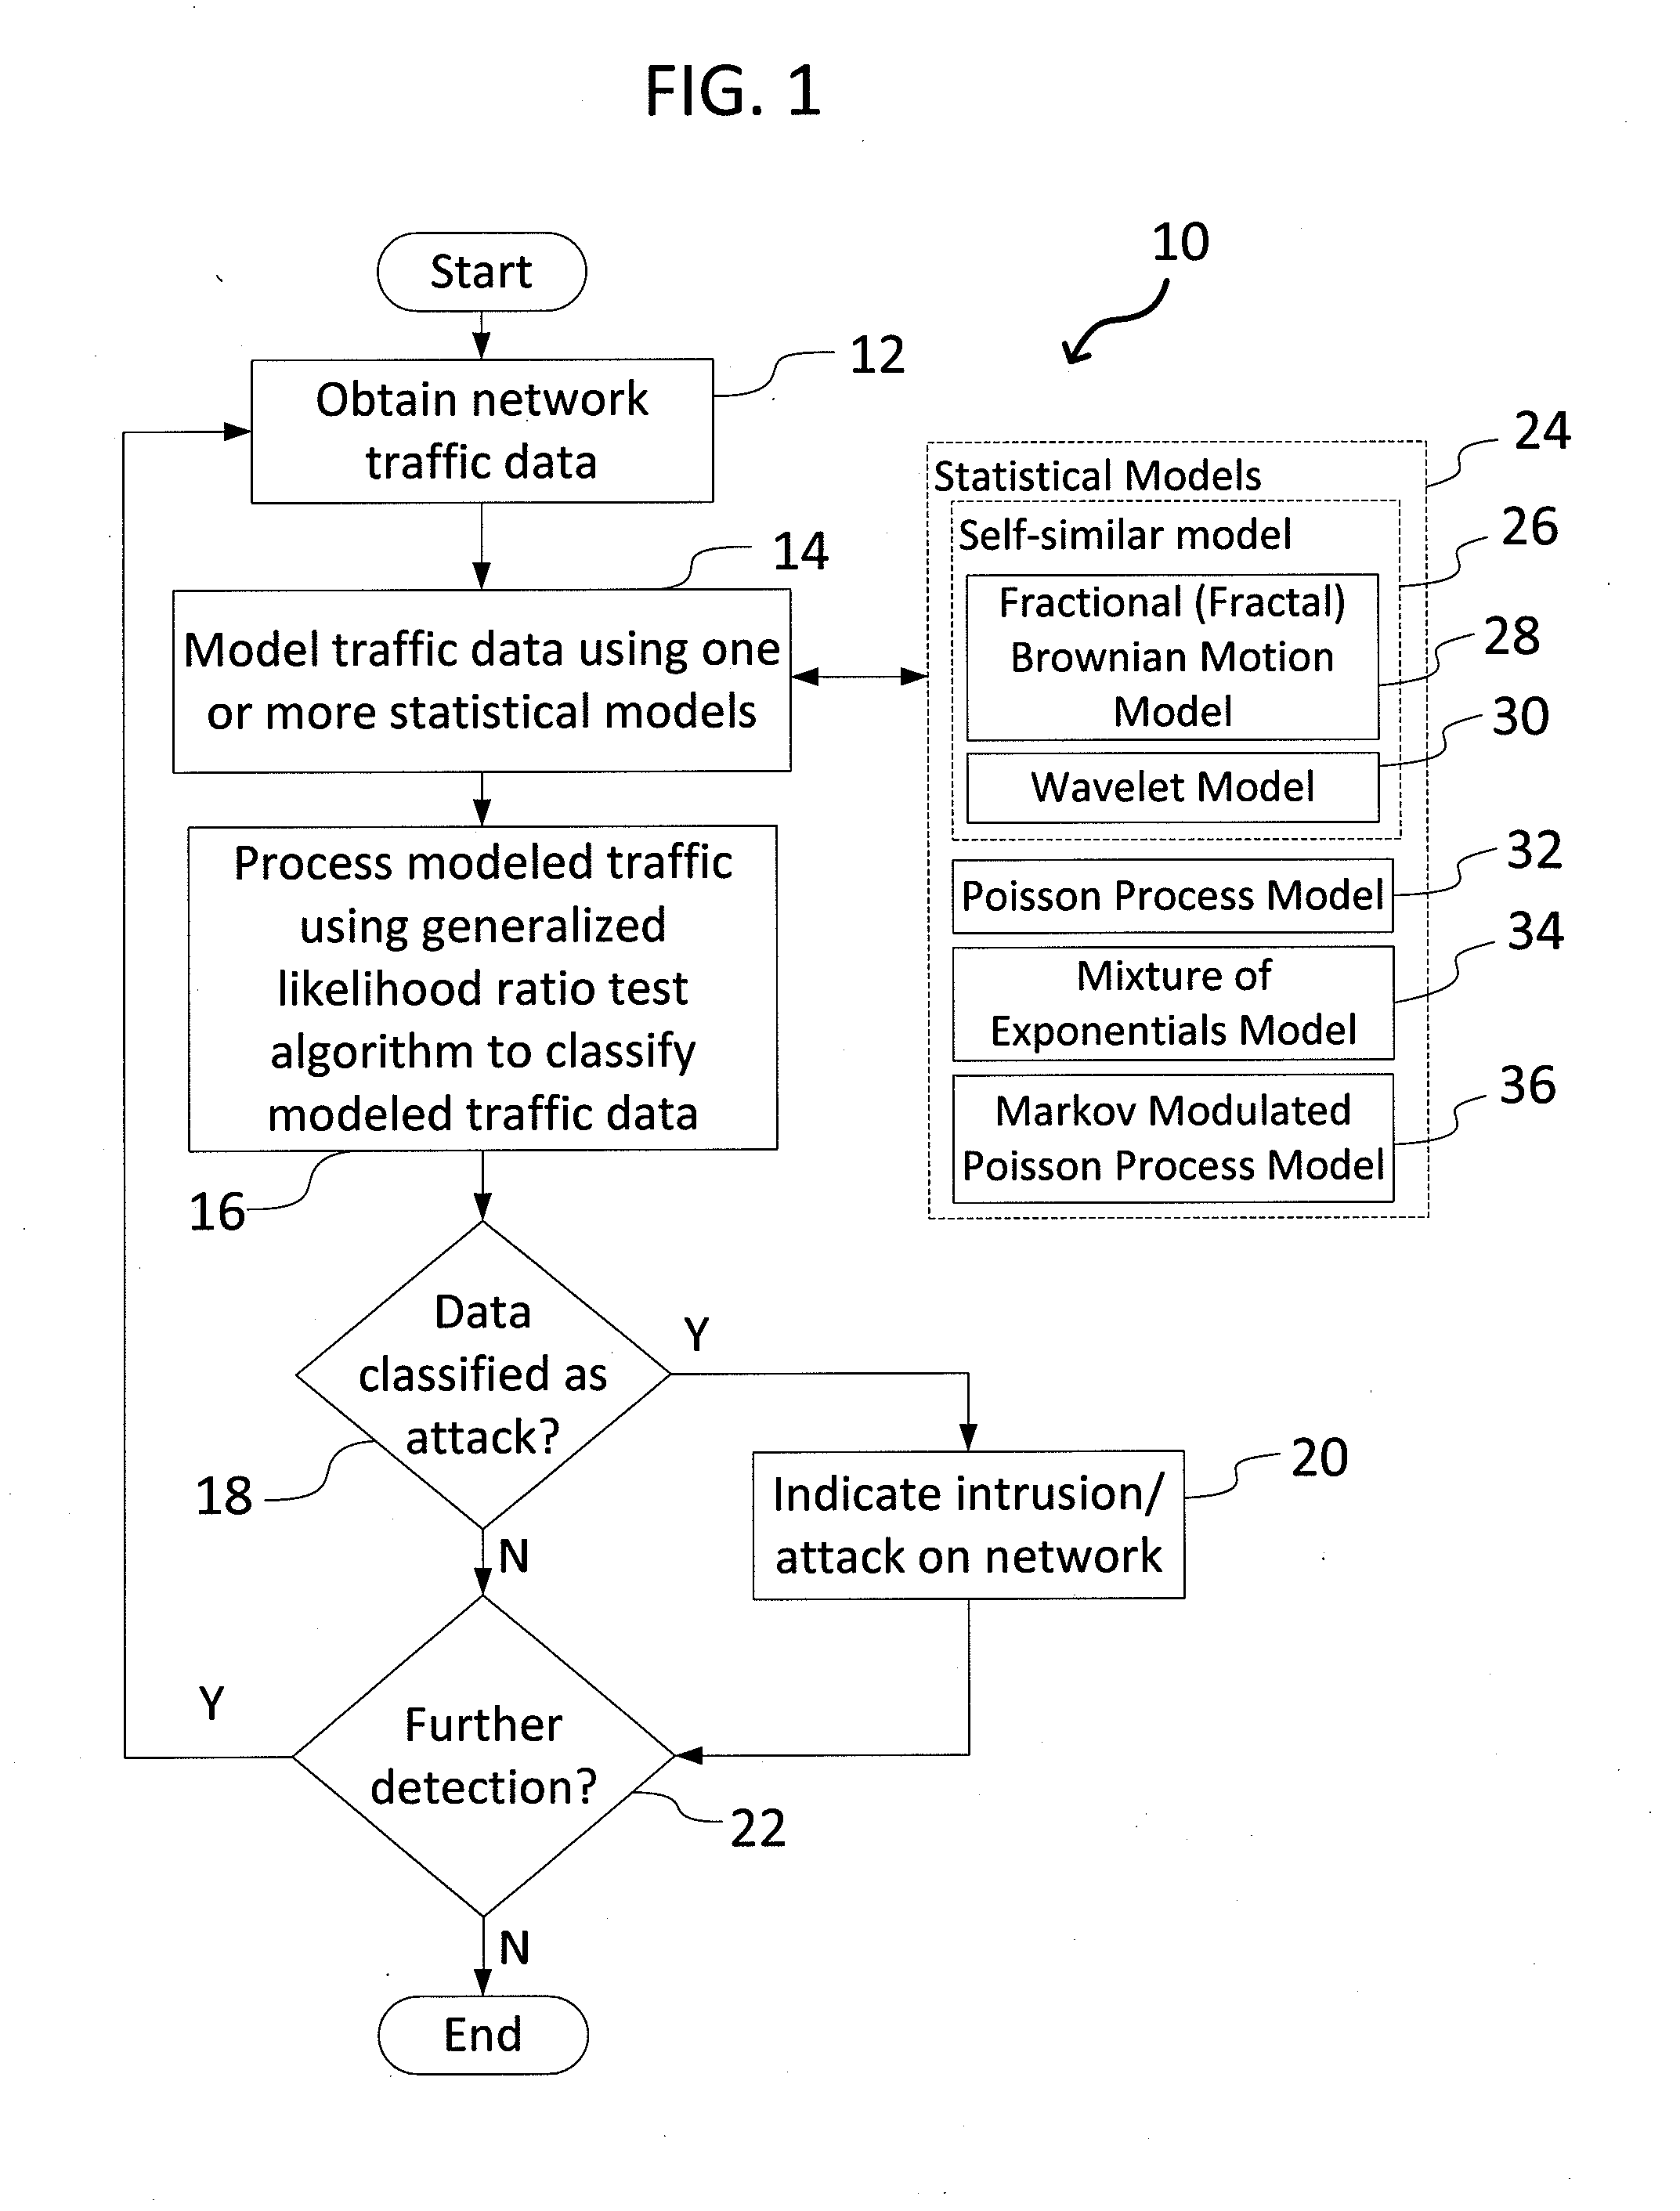 System and Method for Detecting Network Intrusions Using Statistical Models and a Generalized Likelihood Ratio Test